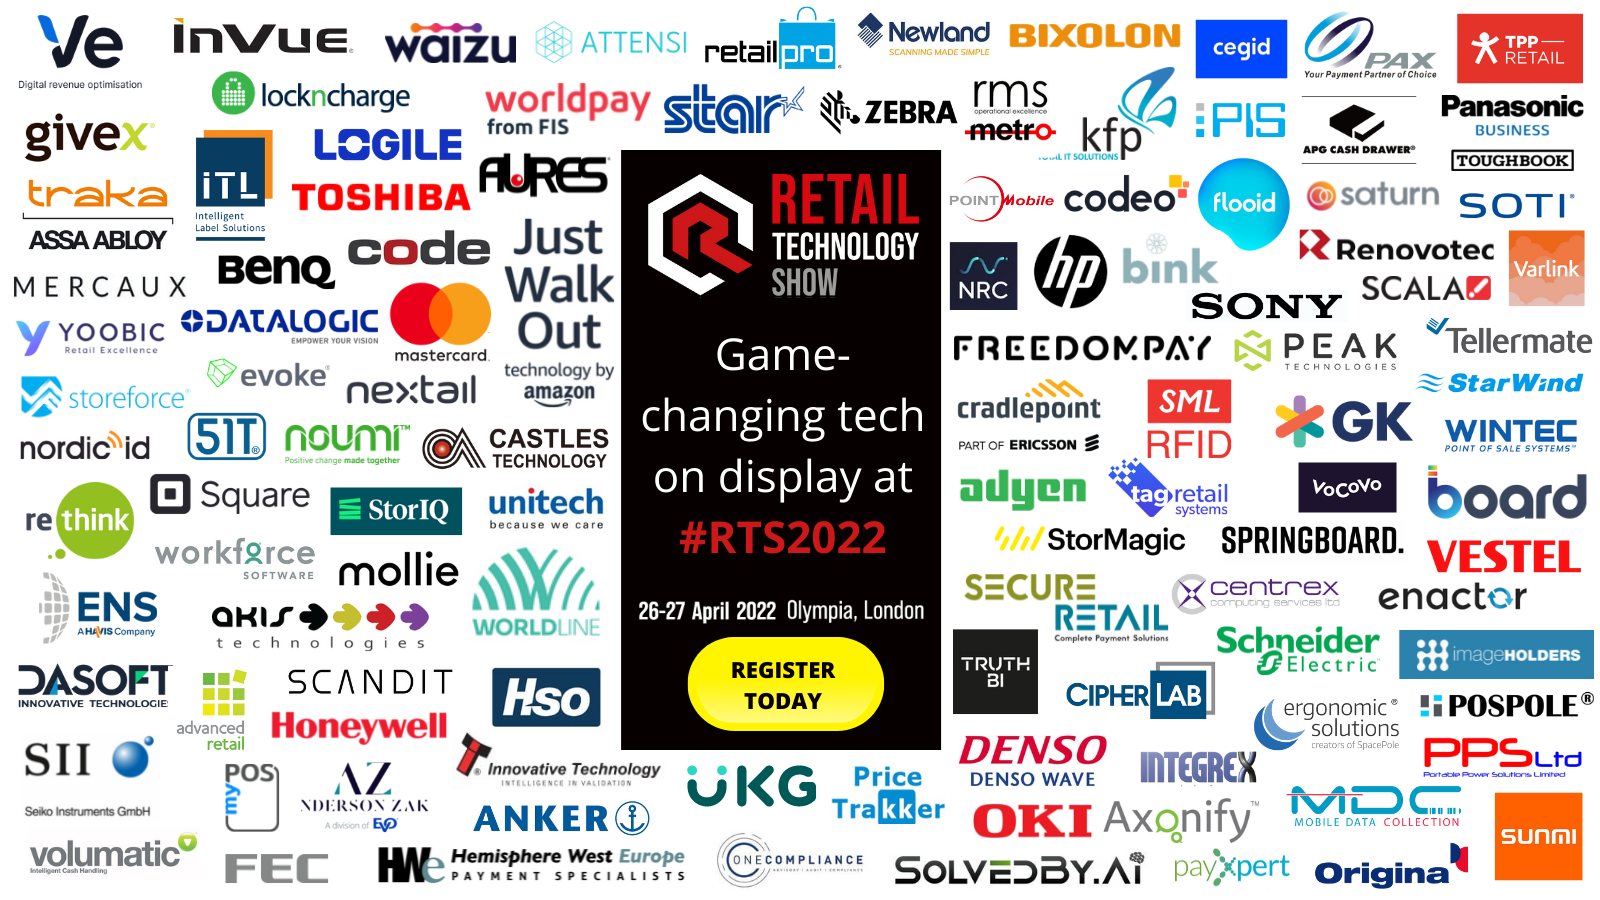 Amazon Just Walk Out, HP and Worldpay join 170+ tech innovators exhibiting at Retail Technology Show